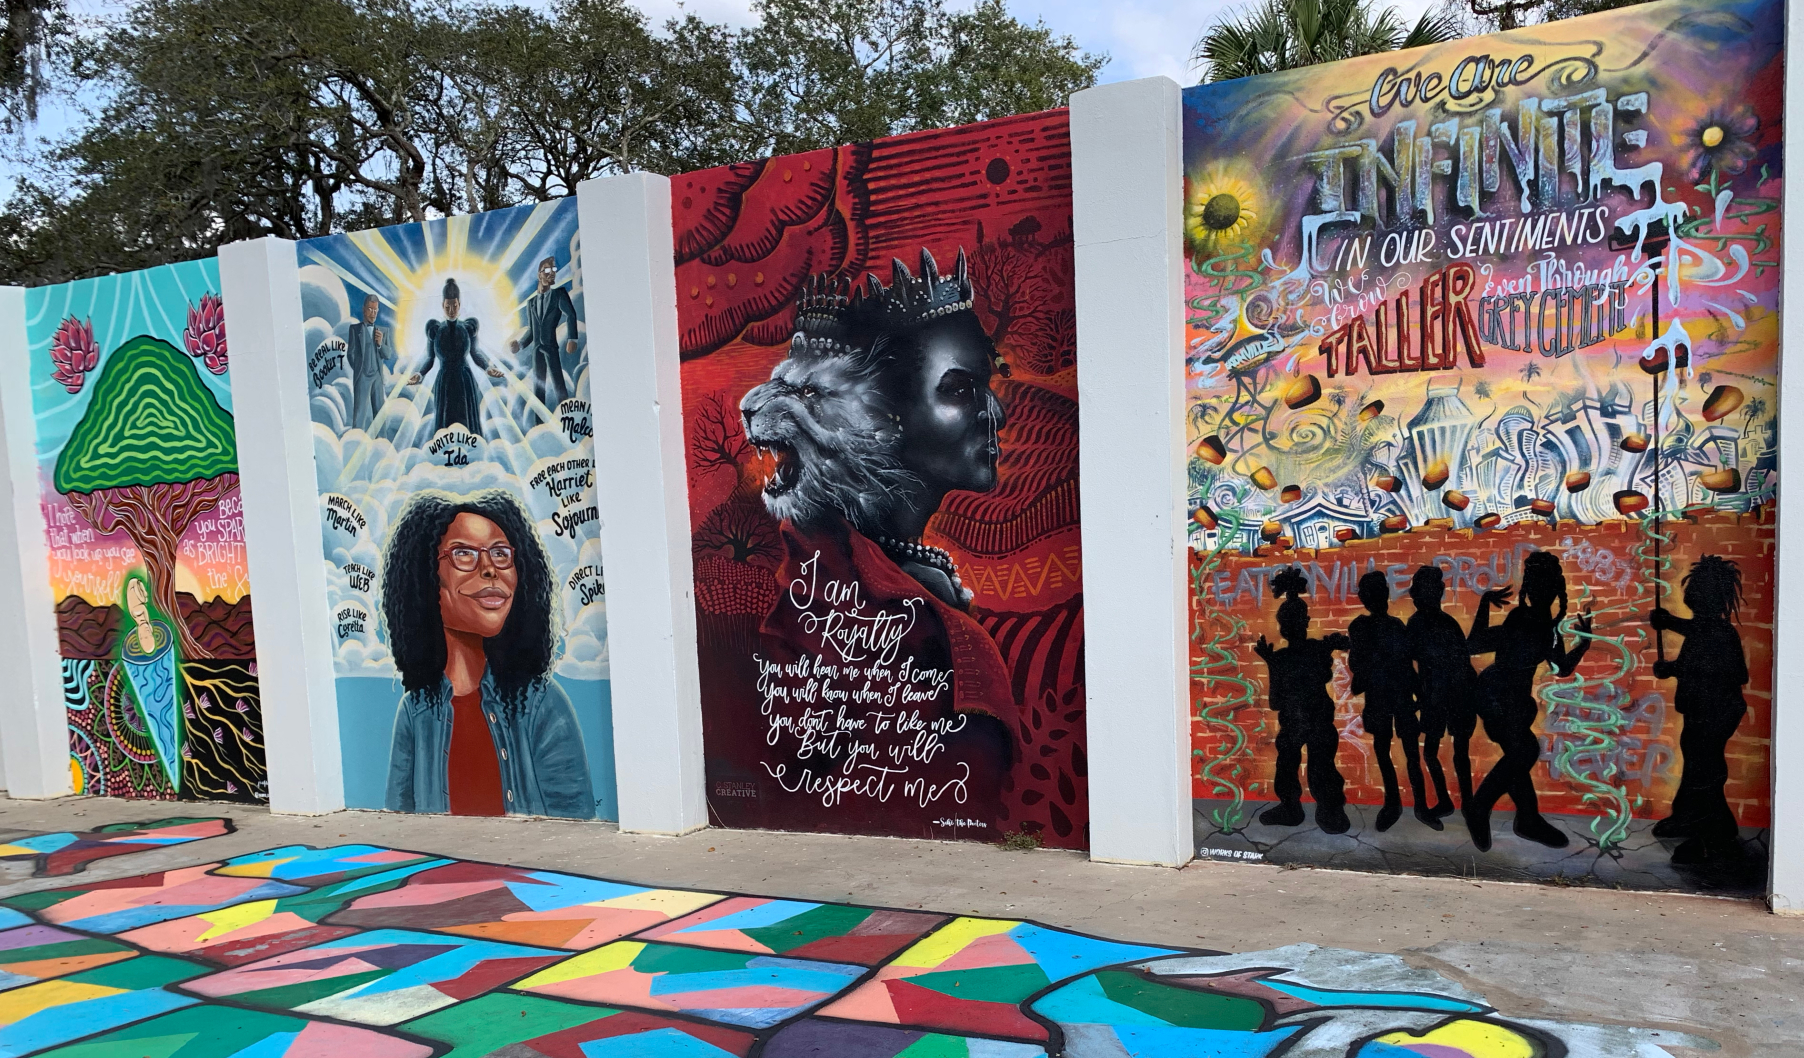 Wall of murals in Eatonville